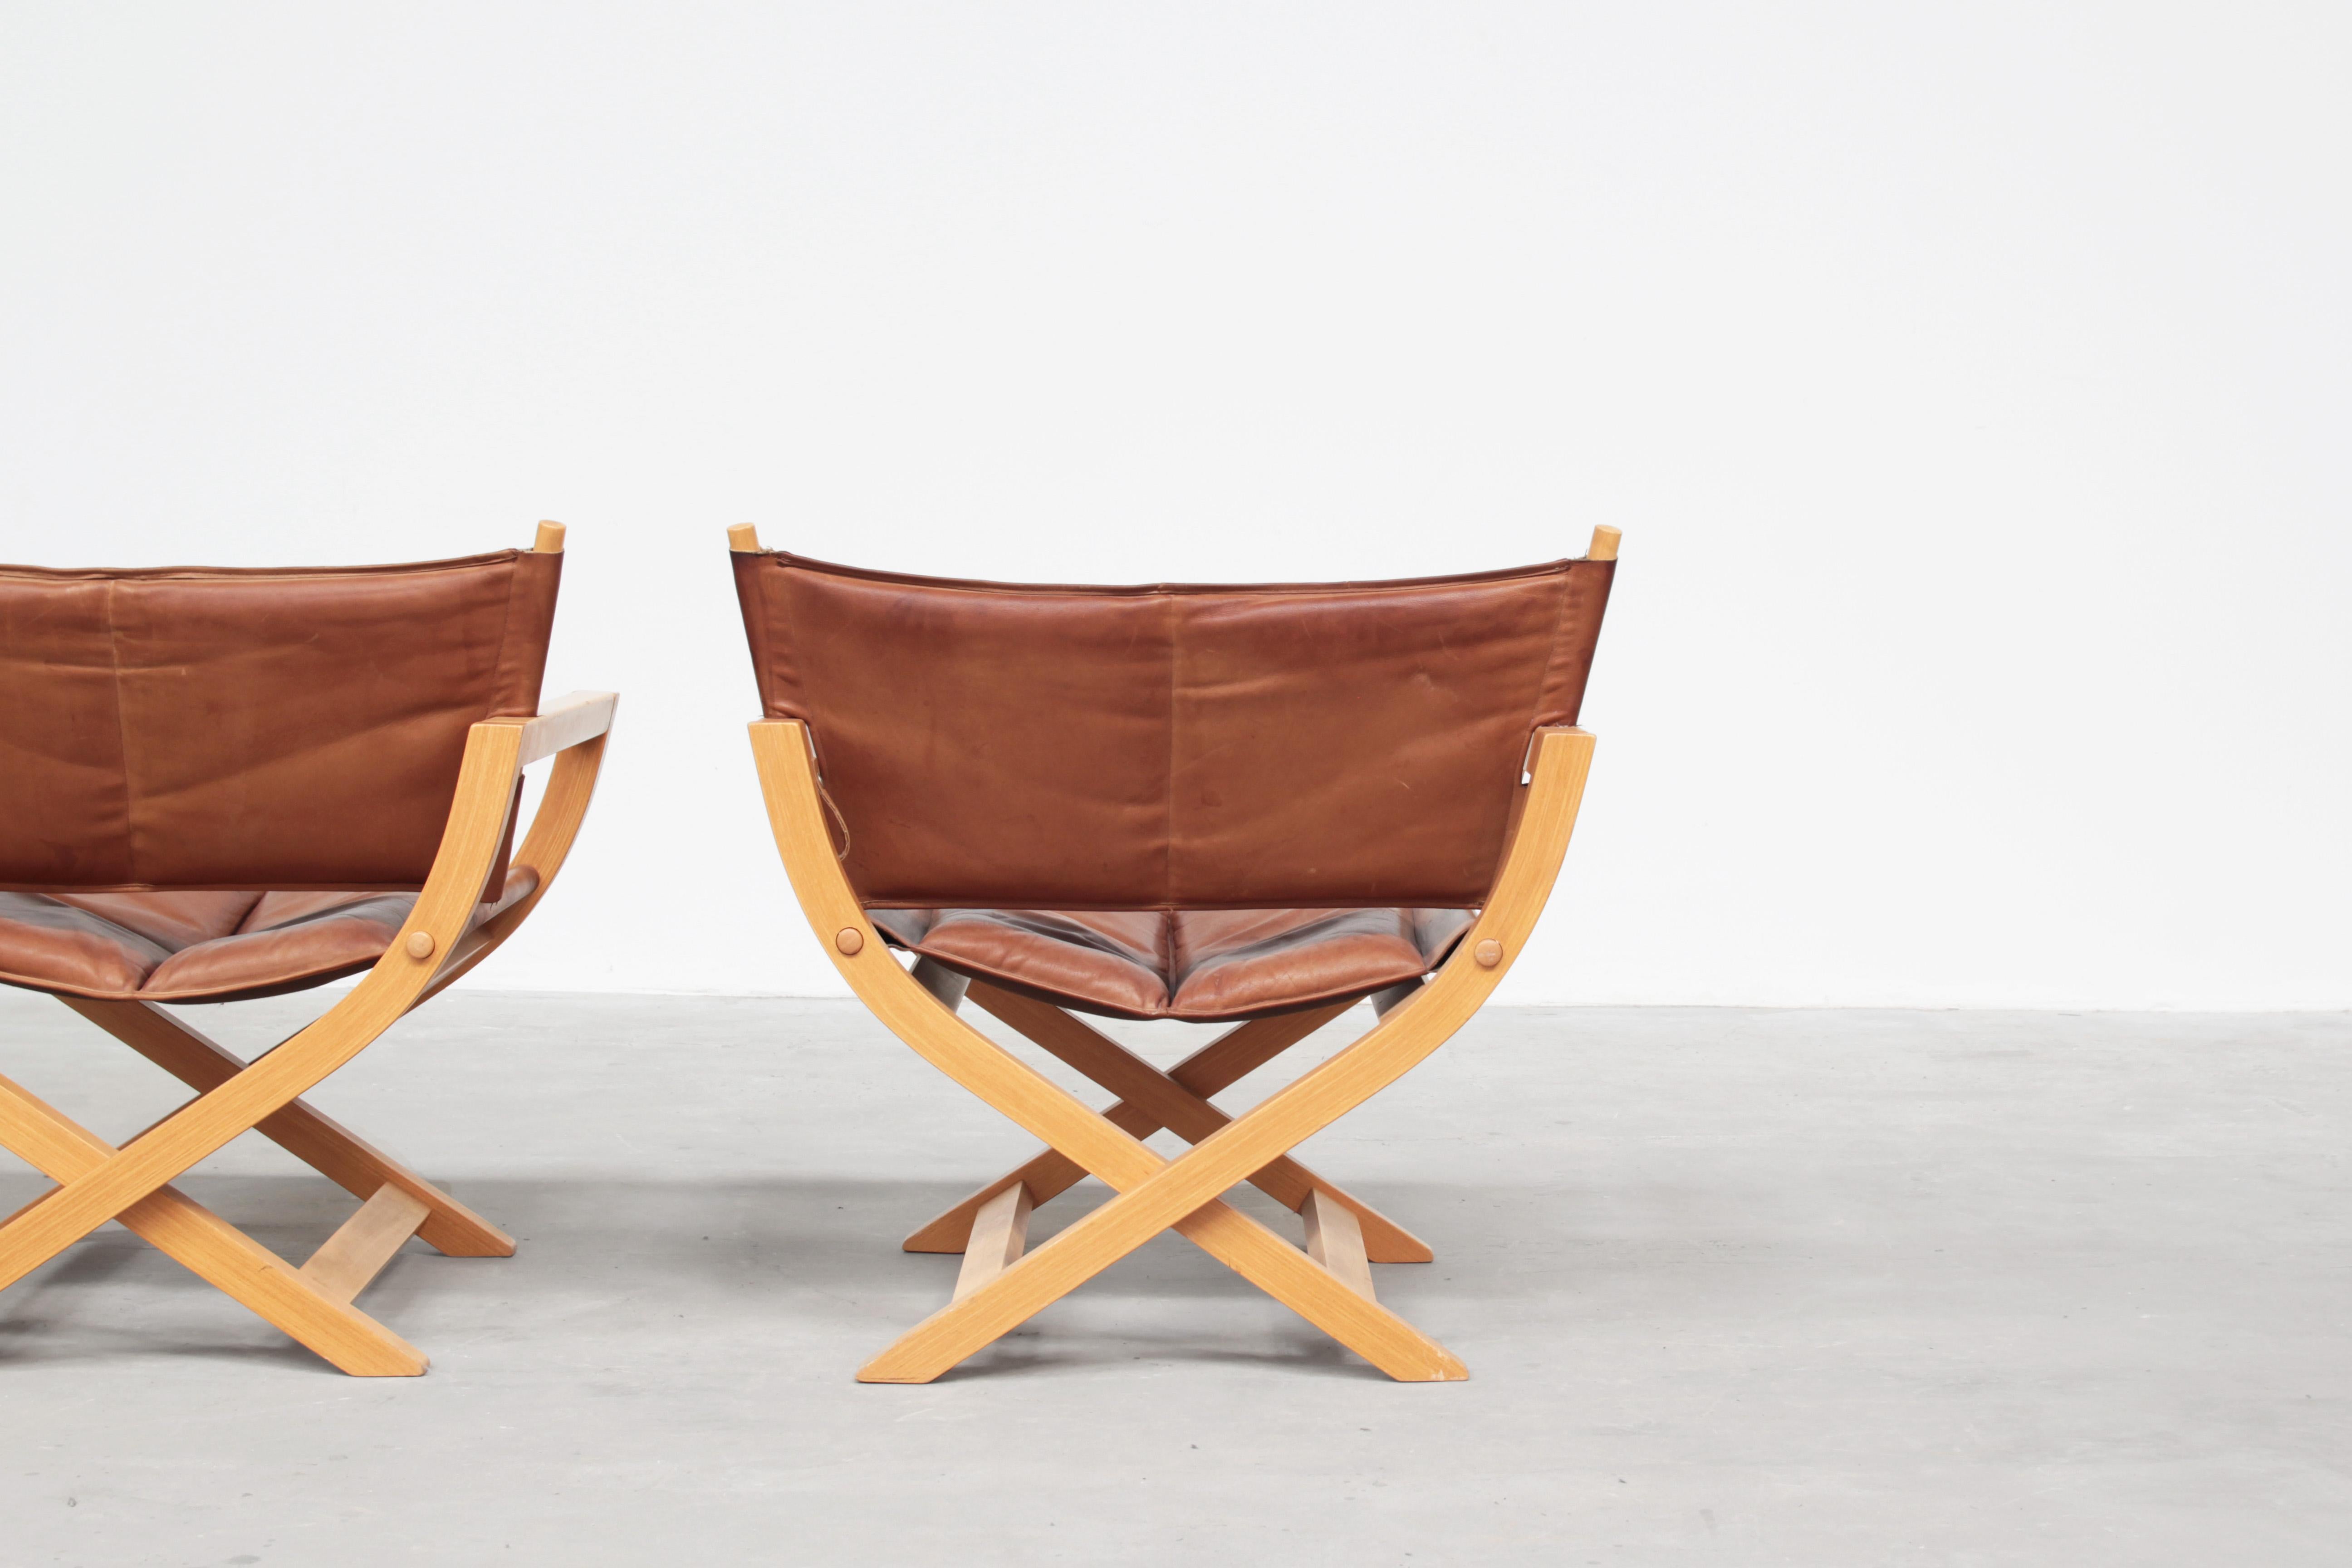 Leather Pair of Danish Lounge Chairs made by Westnofa, Attributed to Børge Mogensen